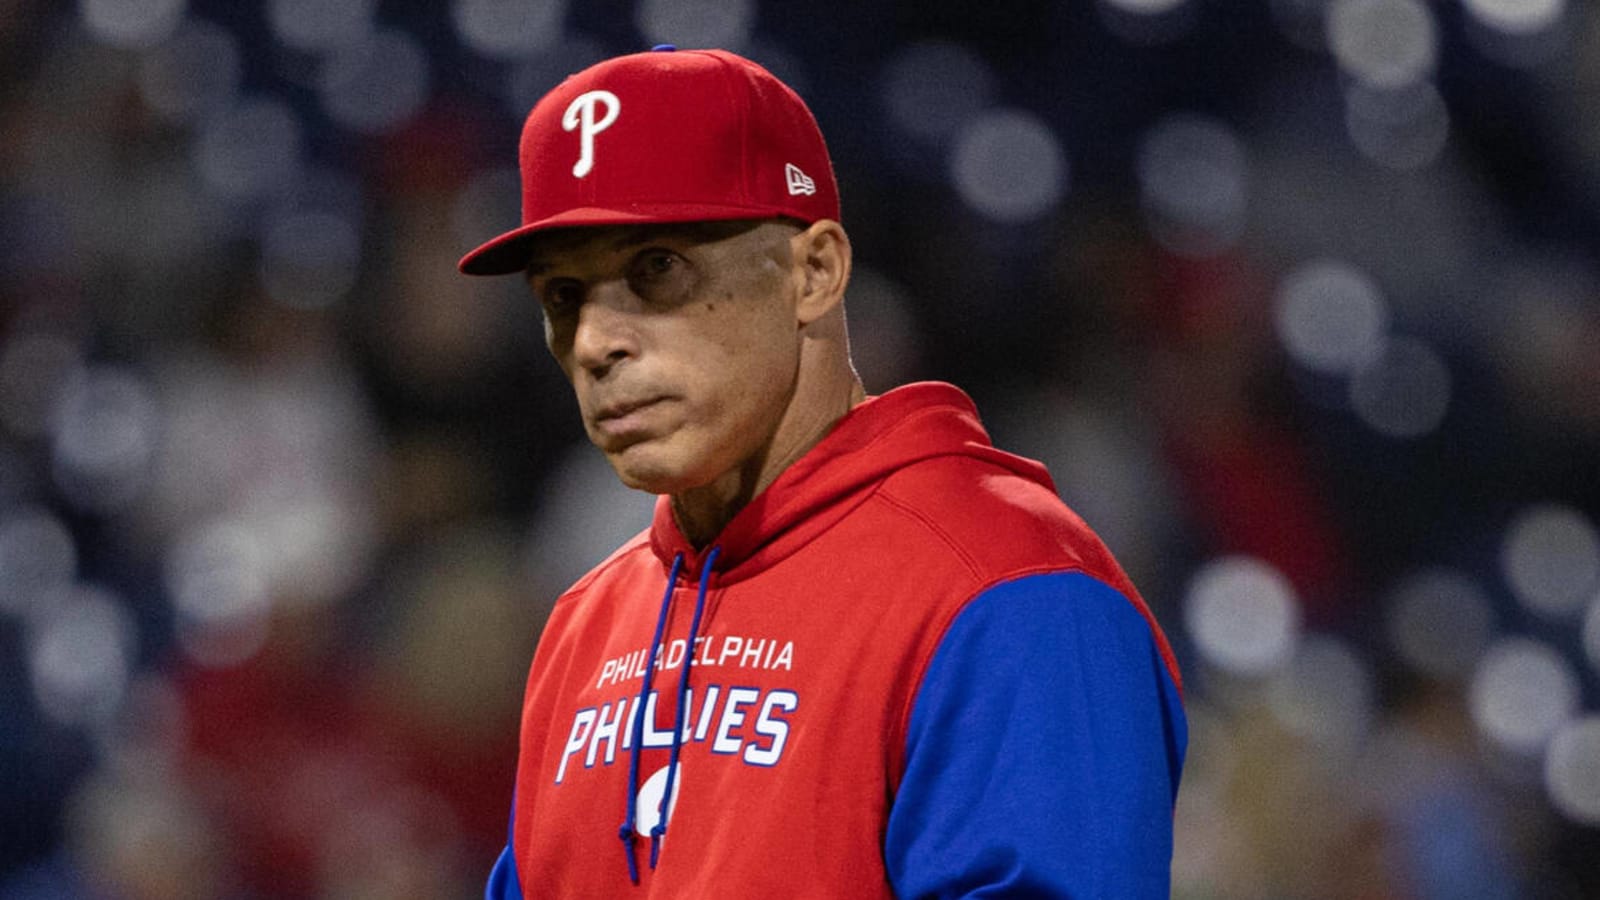 Report: Former Phillies, Yankees manager turns down college gig